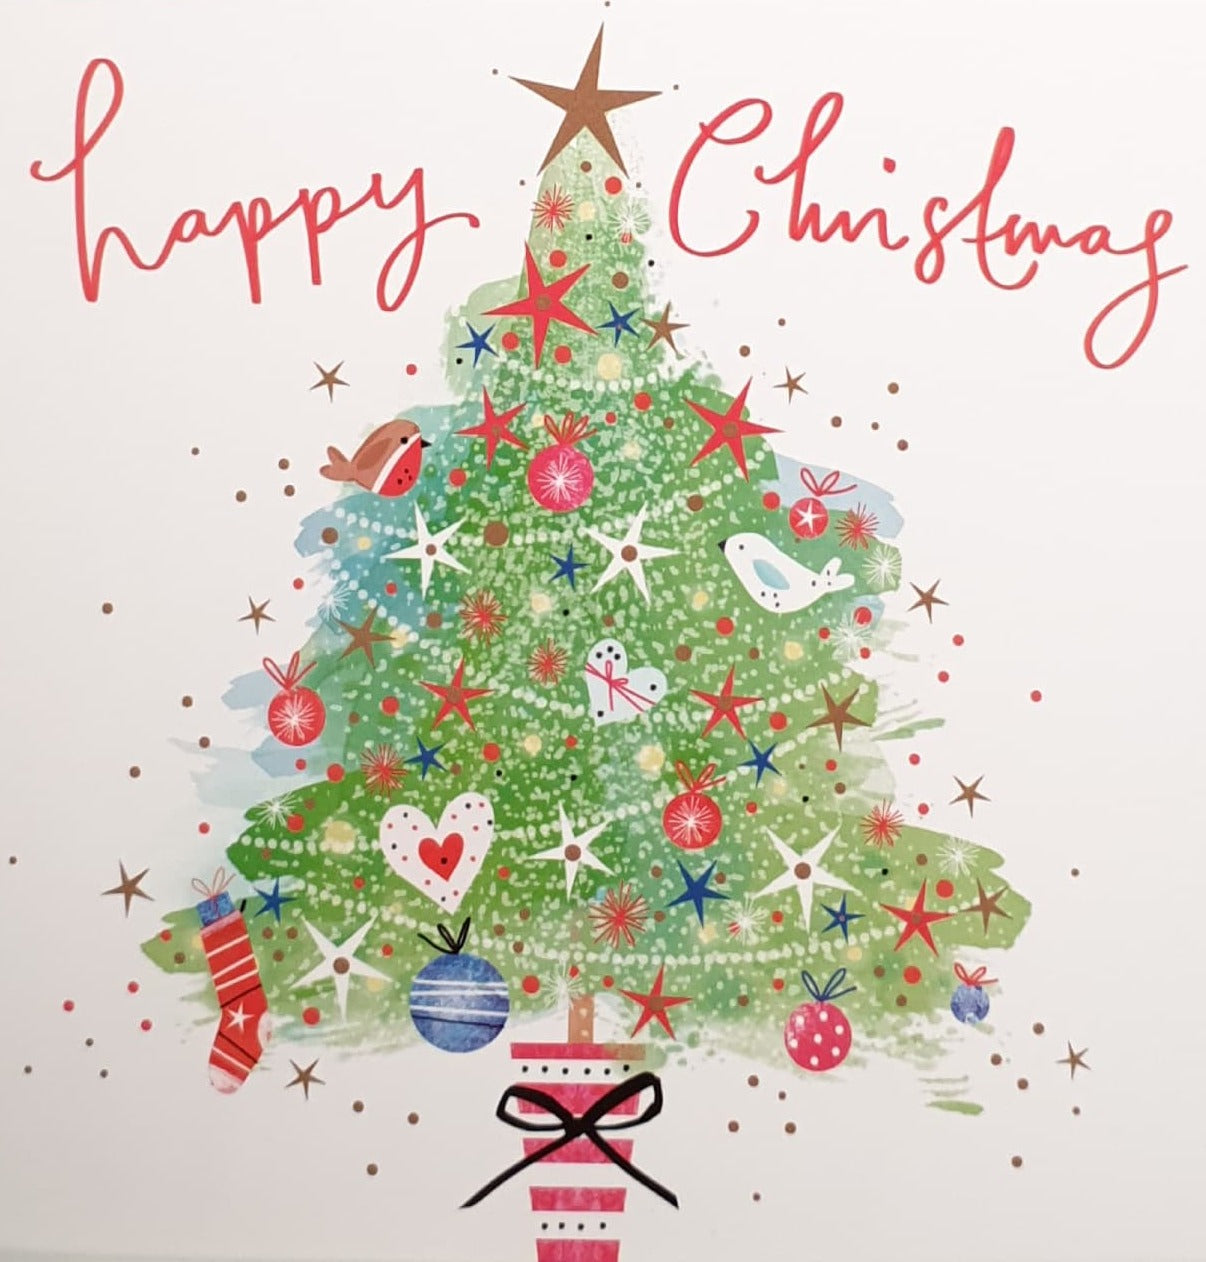 Charity Christmas Card (In Irish & English) - Pack of 8 Large Size / Cystic Fibrosis Ireland - Decorated Christmas Tree